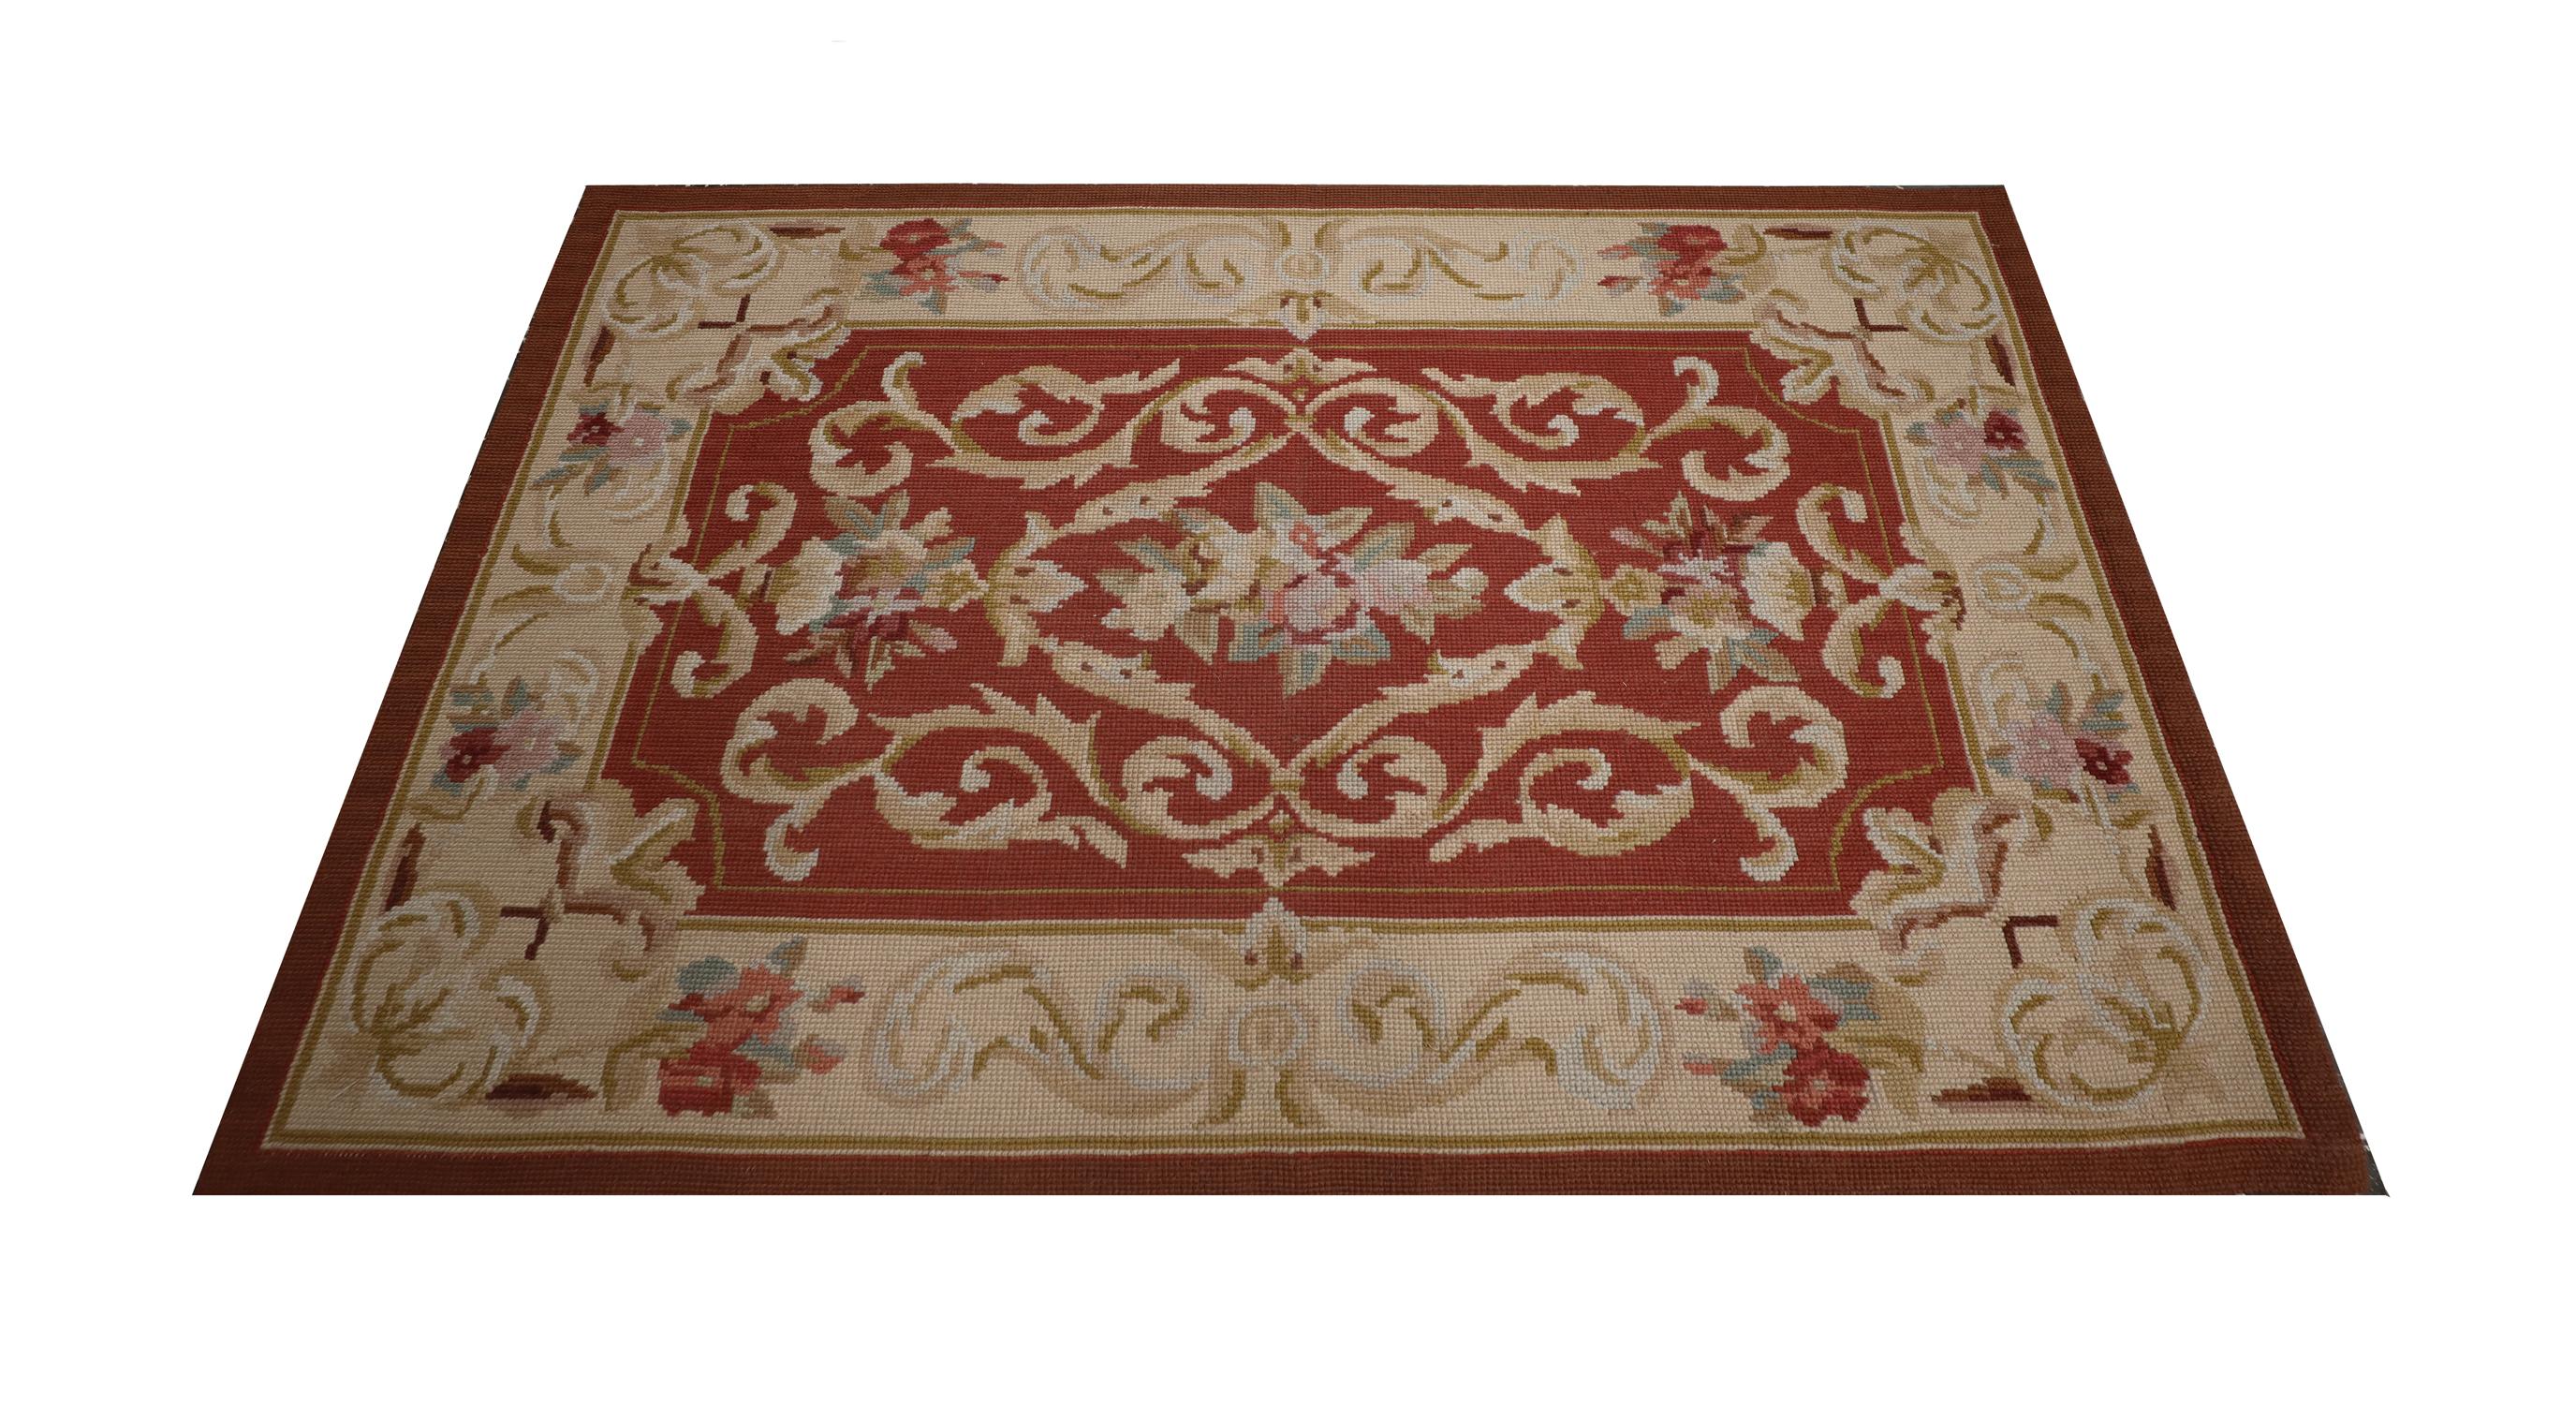 Red and beige accent colours make up the main palette of this elegant needlepoint. Woven with a symmetrical foliate design that has been intricately woven with flowers winding throughout. The design and colour palette featured in this piece make it